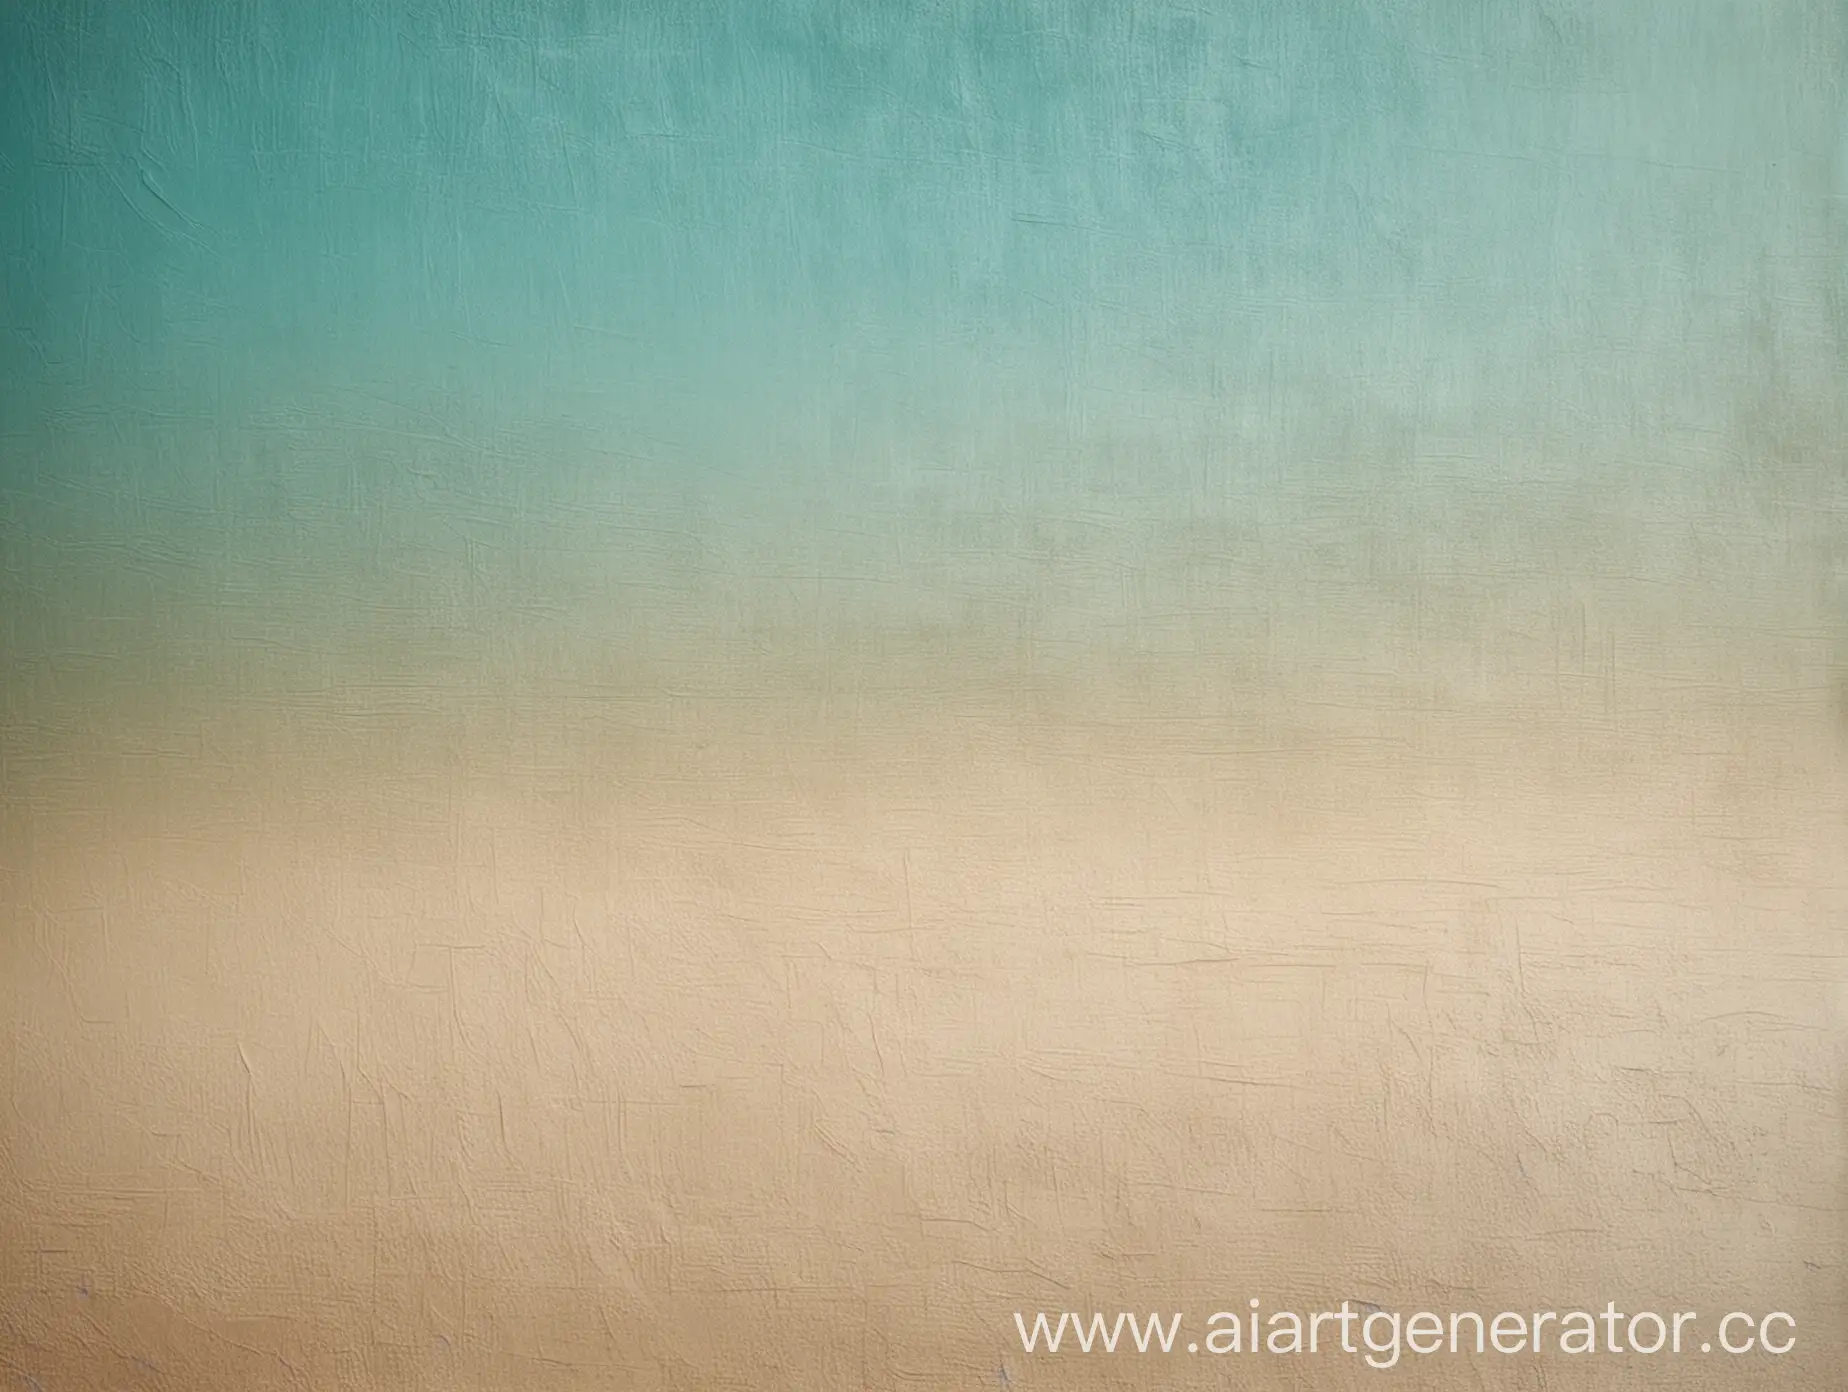 Abstract-Background-with-Turquoise-and-Beige-Gradient-and-Graininess